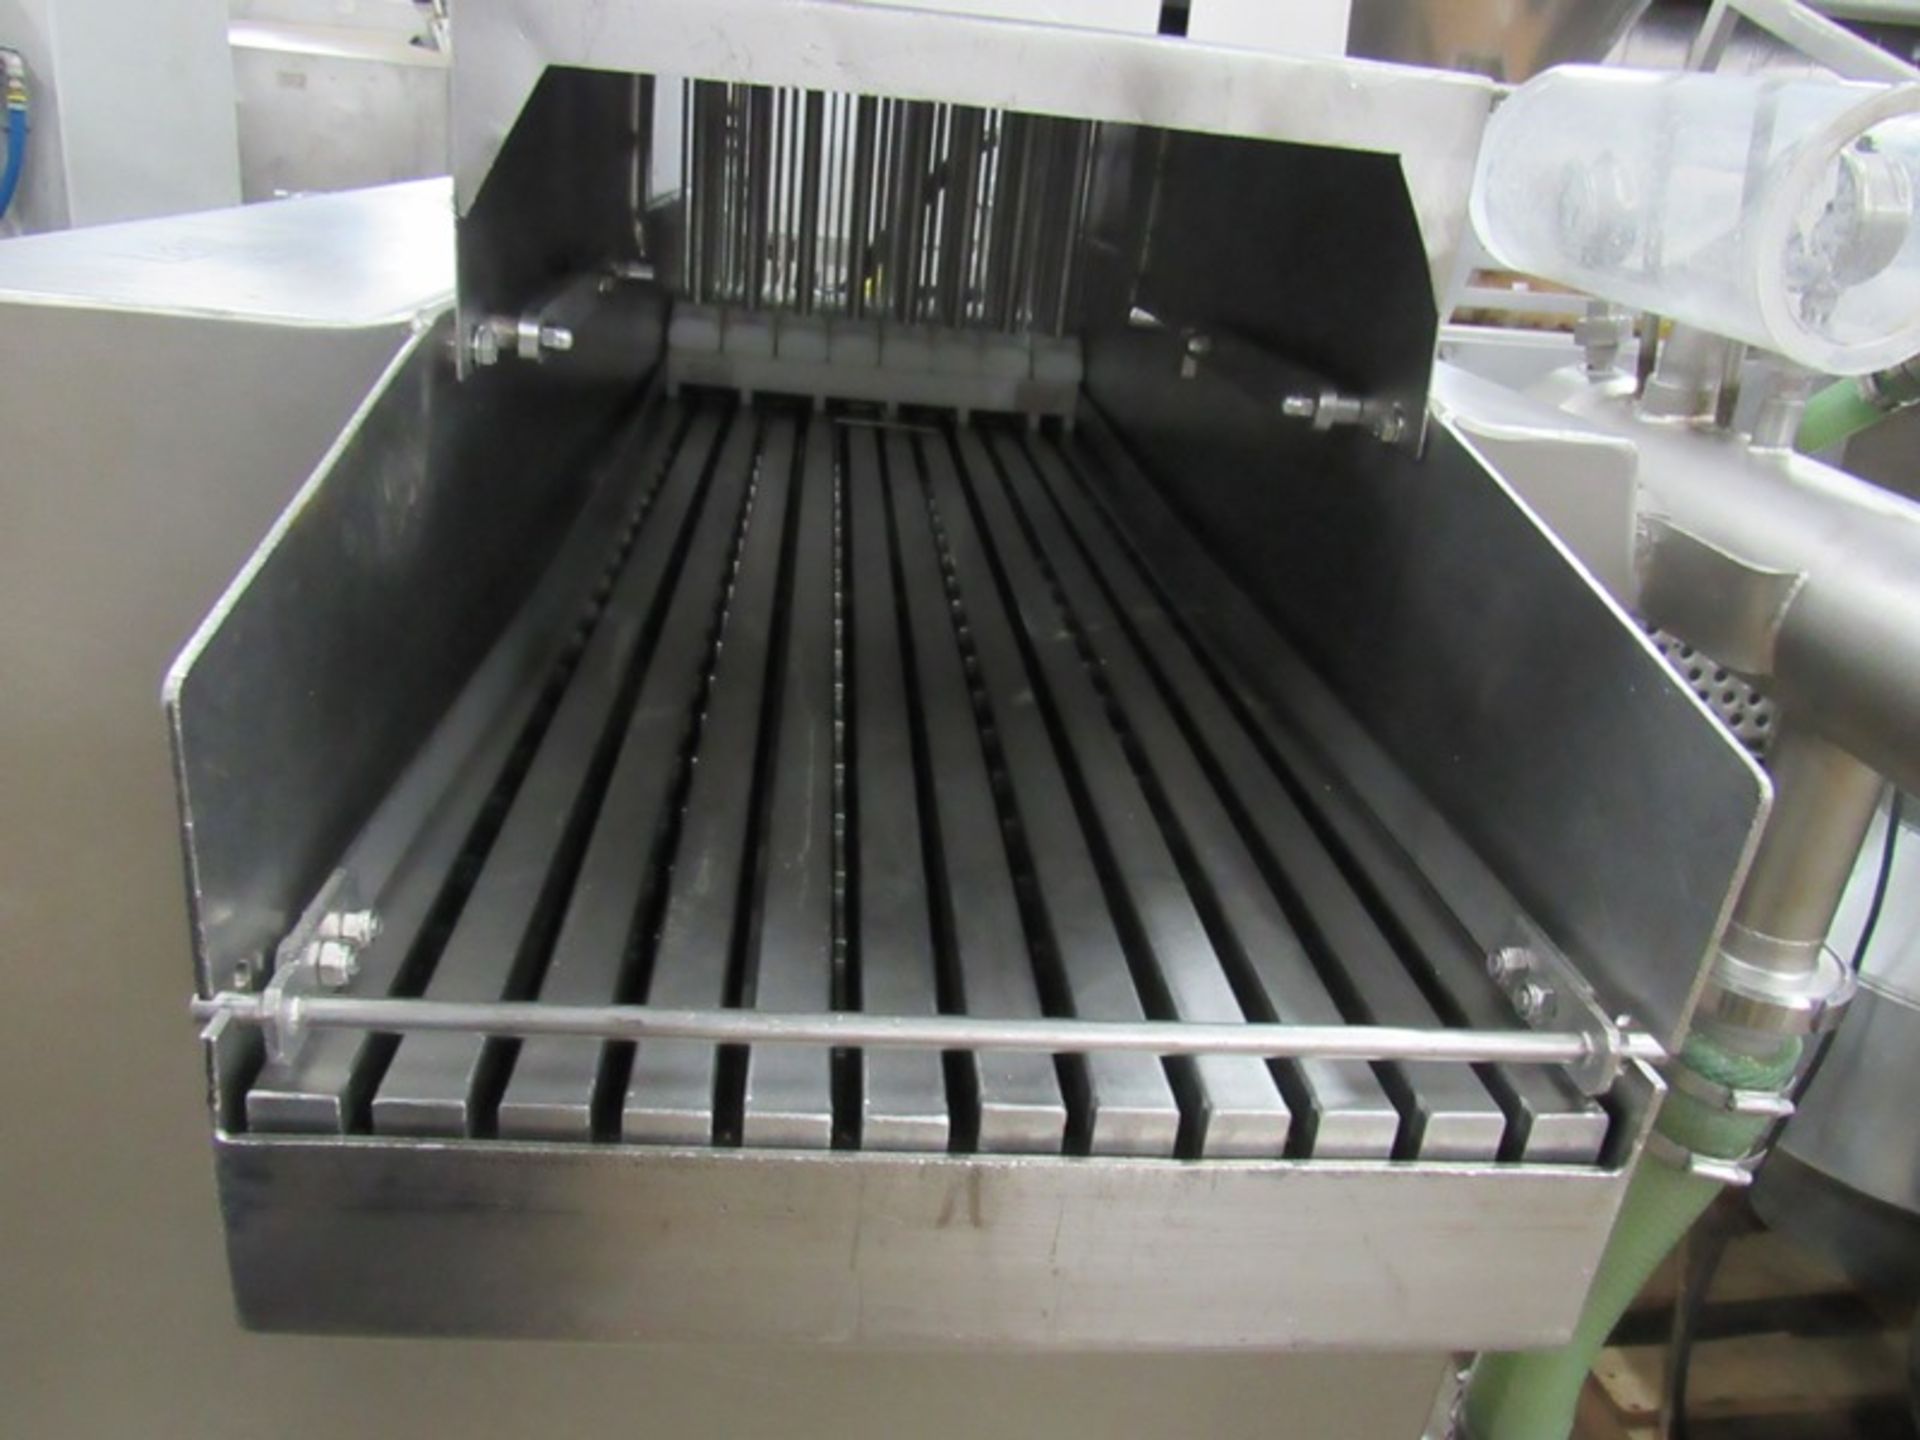 Townsend Mdl. PI 128/270 Pickle Injector, 128 needles, 16" wide walking beam conveyor, complete with - Image 4 of 6